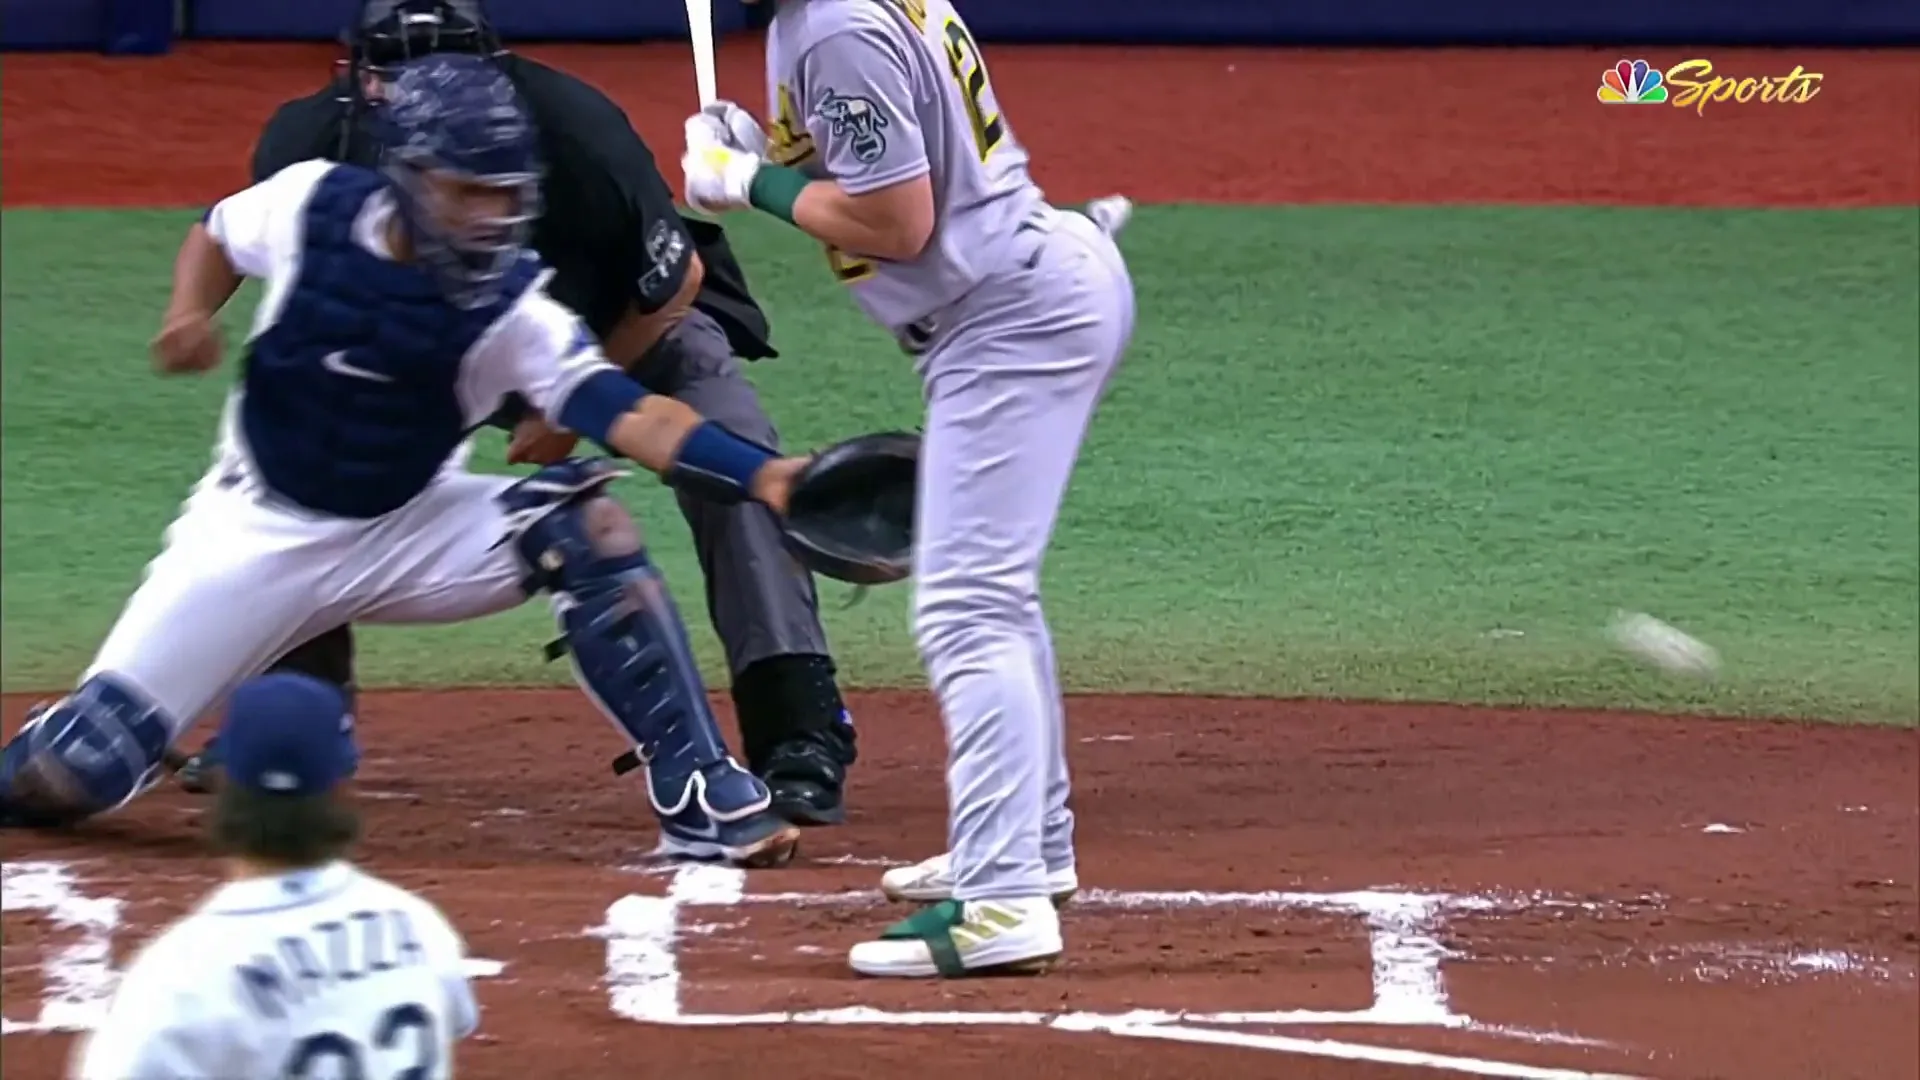 A's catcher Sean Murphy goes viral after HBP on butt against Rays